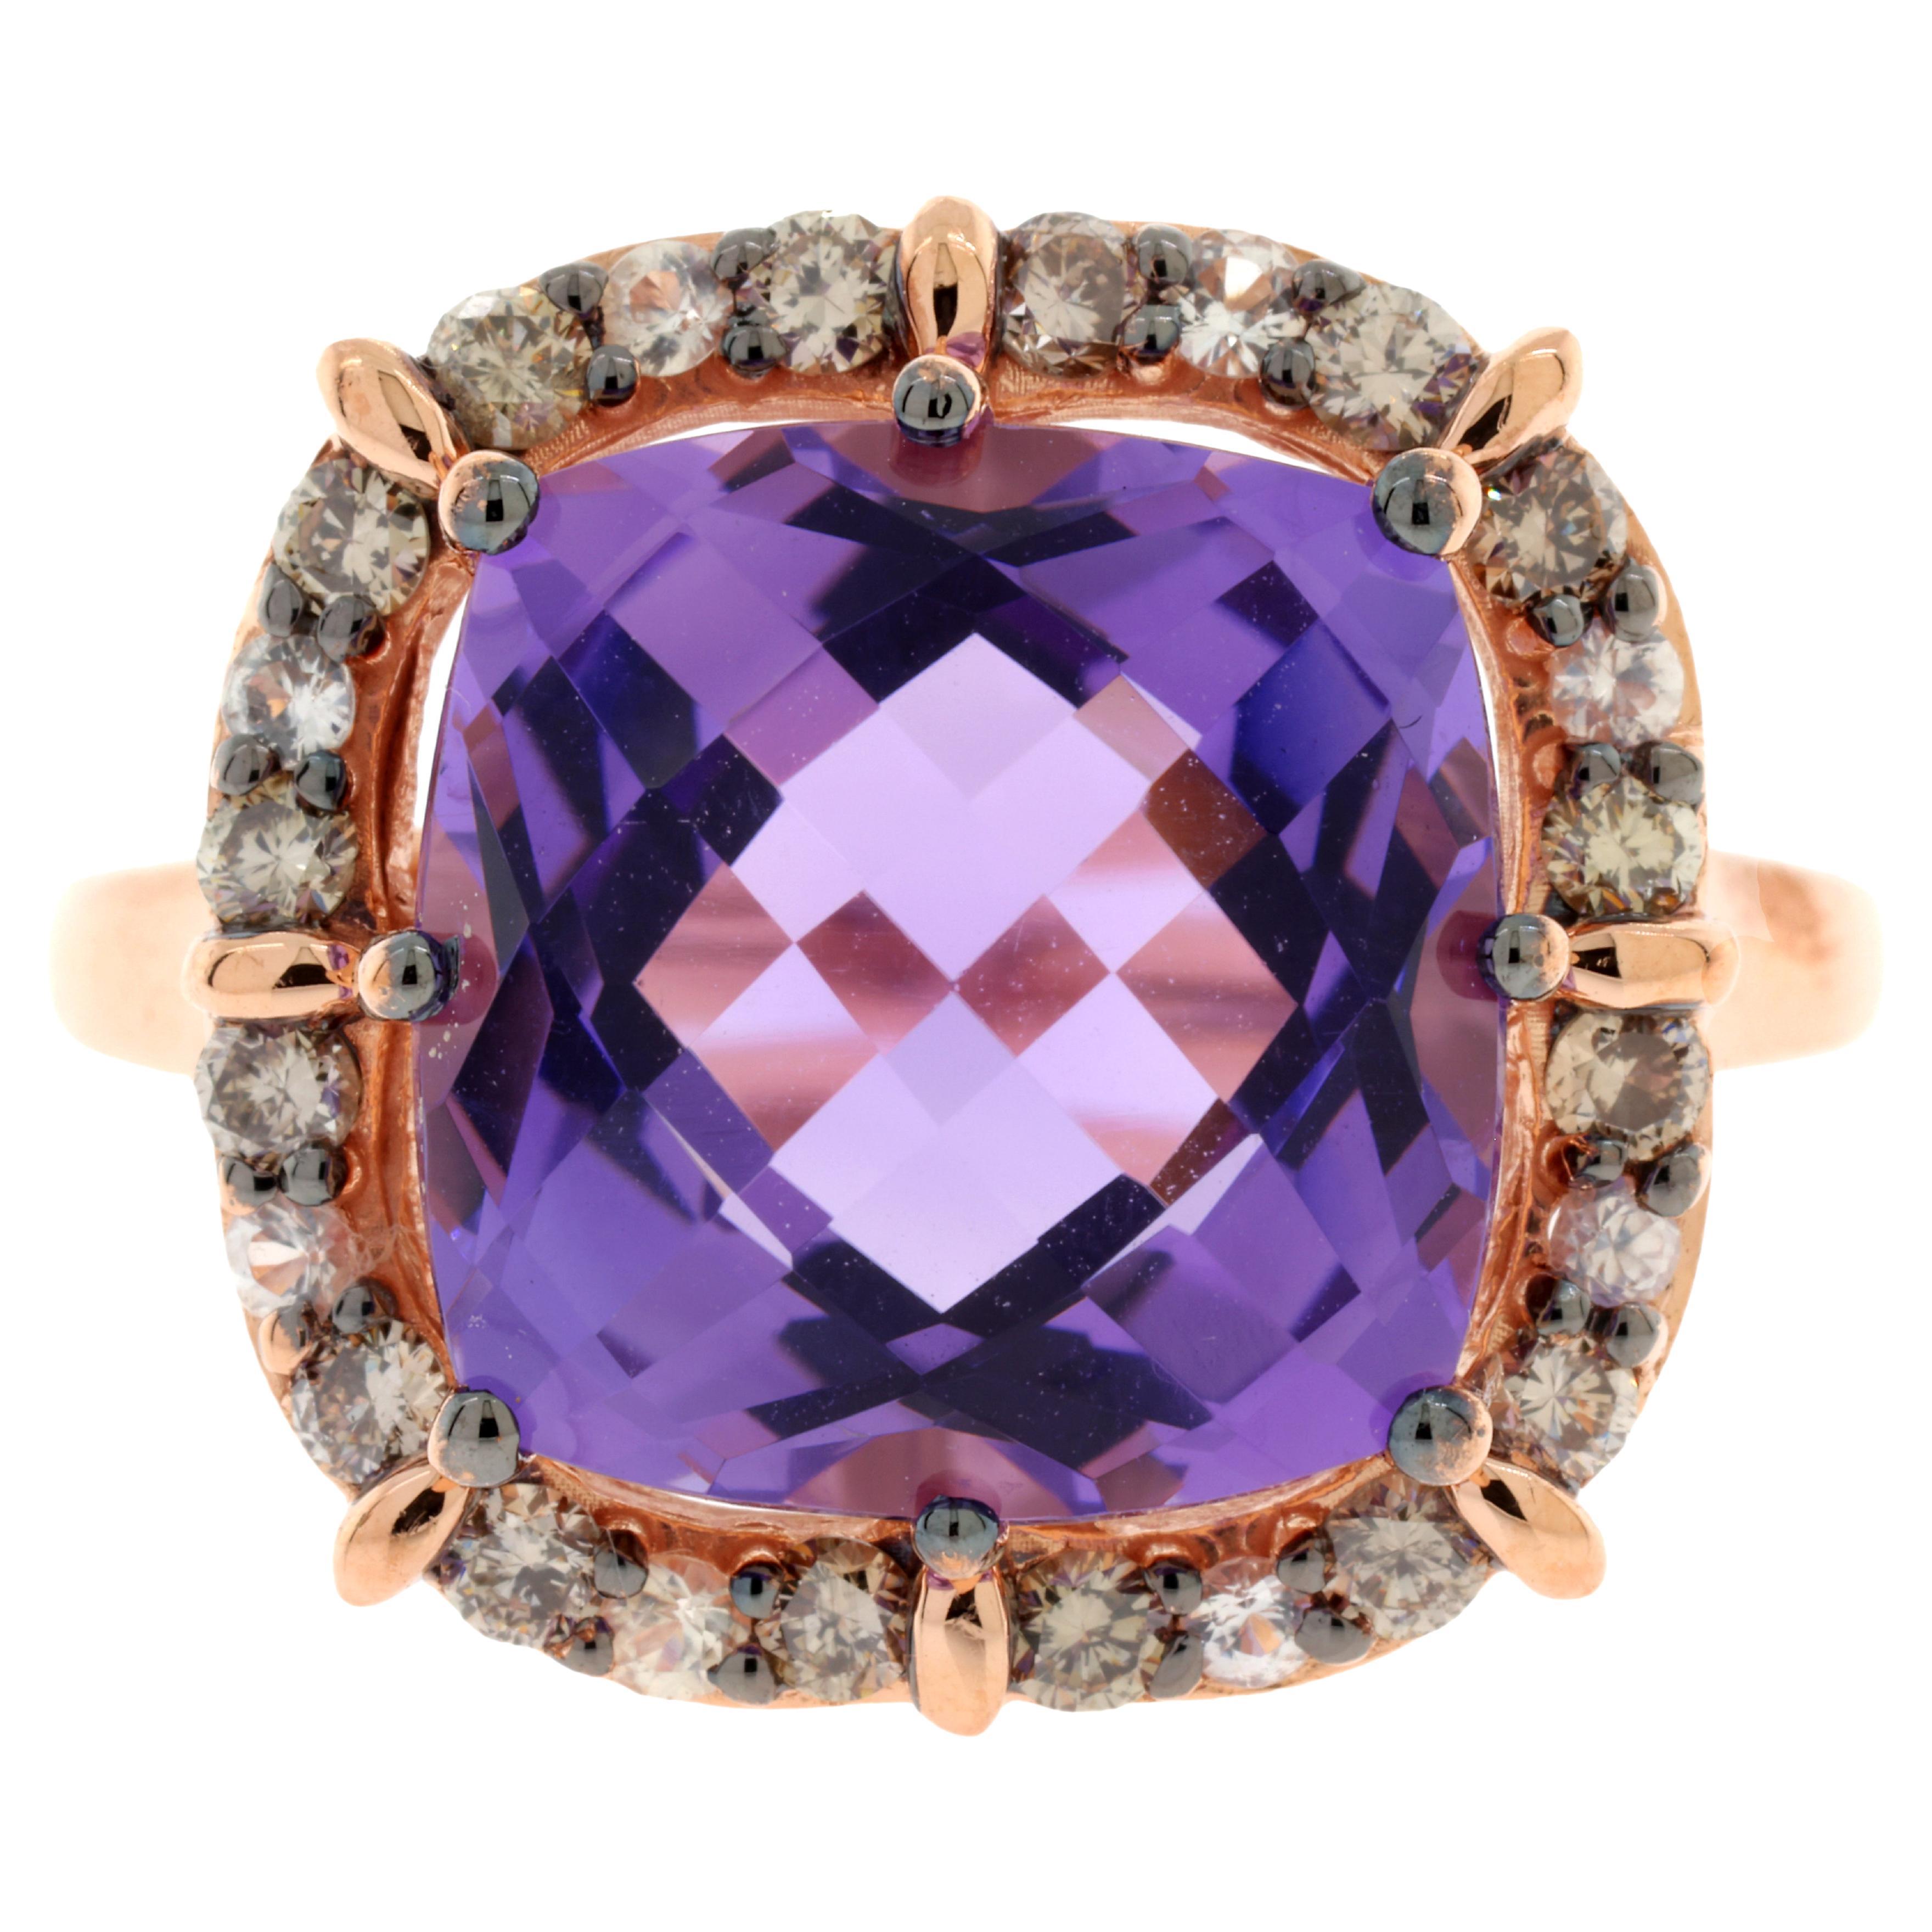 Roberto Ricci Checkerboard Cushion Cut Amethyst Ring with Halo in 14K Rose Gold 